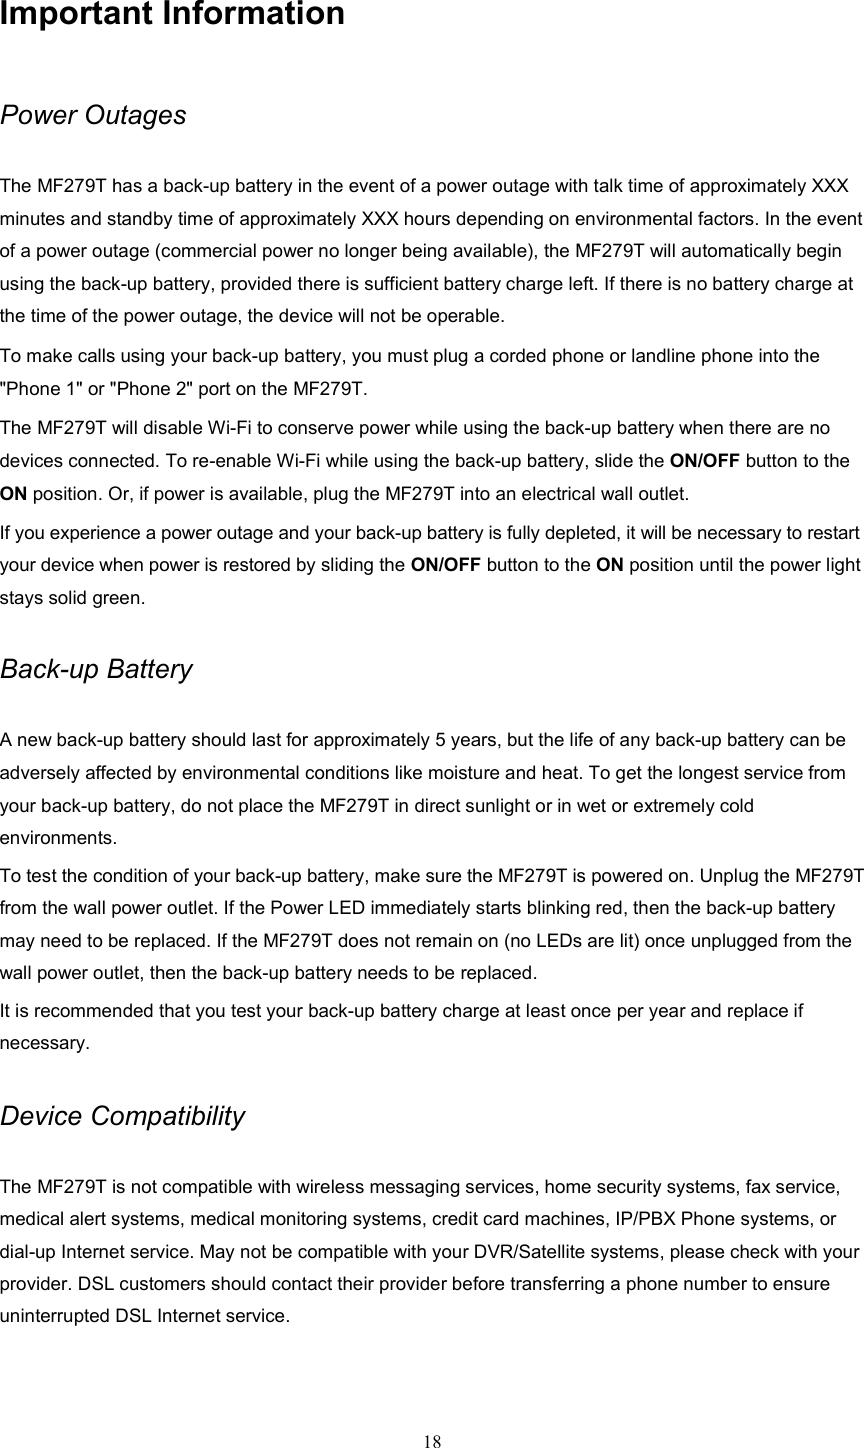 18  Important Information Power Outages The MF279T has a back-up battery in the event of a power outage with talk time of approximately XXX minutes and standby time of approximately XXX hours depending on environmental factors. In the event of a power outage (commercial power no longer being available), the MF279T will automatically begin using the back-up battery, provided there is sufficient battery charge left. If there is no battery charge at the time of the power outage, the device will not be operable. To make calls using your back-up battery, you must plug a corded phone or landline phone into the &quot;Phone 1&quot; or &quot;Phone 2&quot; port on the MF279T.   The MF279T will disable Wi-Fi to conserve power while using the back-up battery when there are no devices connected. To re-enable Wi-Fi while using the back-up battery, slide the ON/OFF button to the ON position. Or, if power is available, plug the MF279T into an electrical wall outlet.     If you experience a power outage and your back-up battery is fully depleted, it will be necessary to restart your device when power is restored by sliding the ON/OFF button to the ON position until the power light stays solid green. Back-up Battery A new back-up battery should last for approximately 5 years, but the life of any back-up battery can be adversely affected by environmental conditions like moisture and heat. To get the longest service from your back-up battery, do not place the MF279T in direct sunlight or in wet or extremely cold environments. To test the condition of your back-up battery, make sure the MF279T is powered on. Unplug the MF279T from the wall power outlet. If the Power LED immediately starts blinking red, then the back-up battery may need to be replaced. If the MF279T does not remain on (no LEDs are lit) once unplugged from the wall power outlet, then the back-up battery needs to be replaced. It is recommended that you test your back-up battery charge at least once per year and replace if necessary.    Device Compatibility The MF279T is not compatible with wireless messaging services, home security systems, fax service, medical alert systems, medical monitoring systems, credit card machines, IP/PBX Phone systems, or dial-up Internet service. May not be compatible with your DVR/Satellite systems, please check with your provider. DSL customers should contact their provider before transferring a phone number to ensure uninterrupted DSL Internet service. 